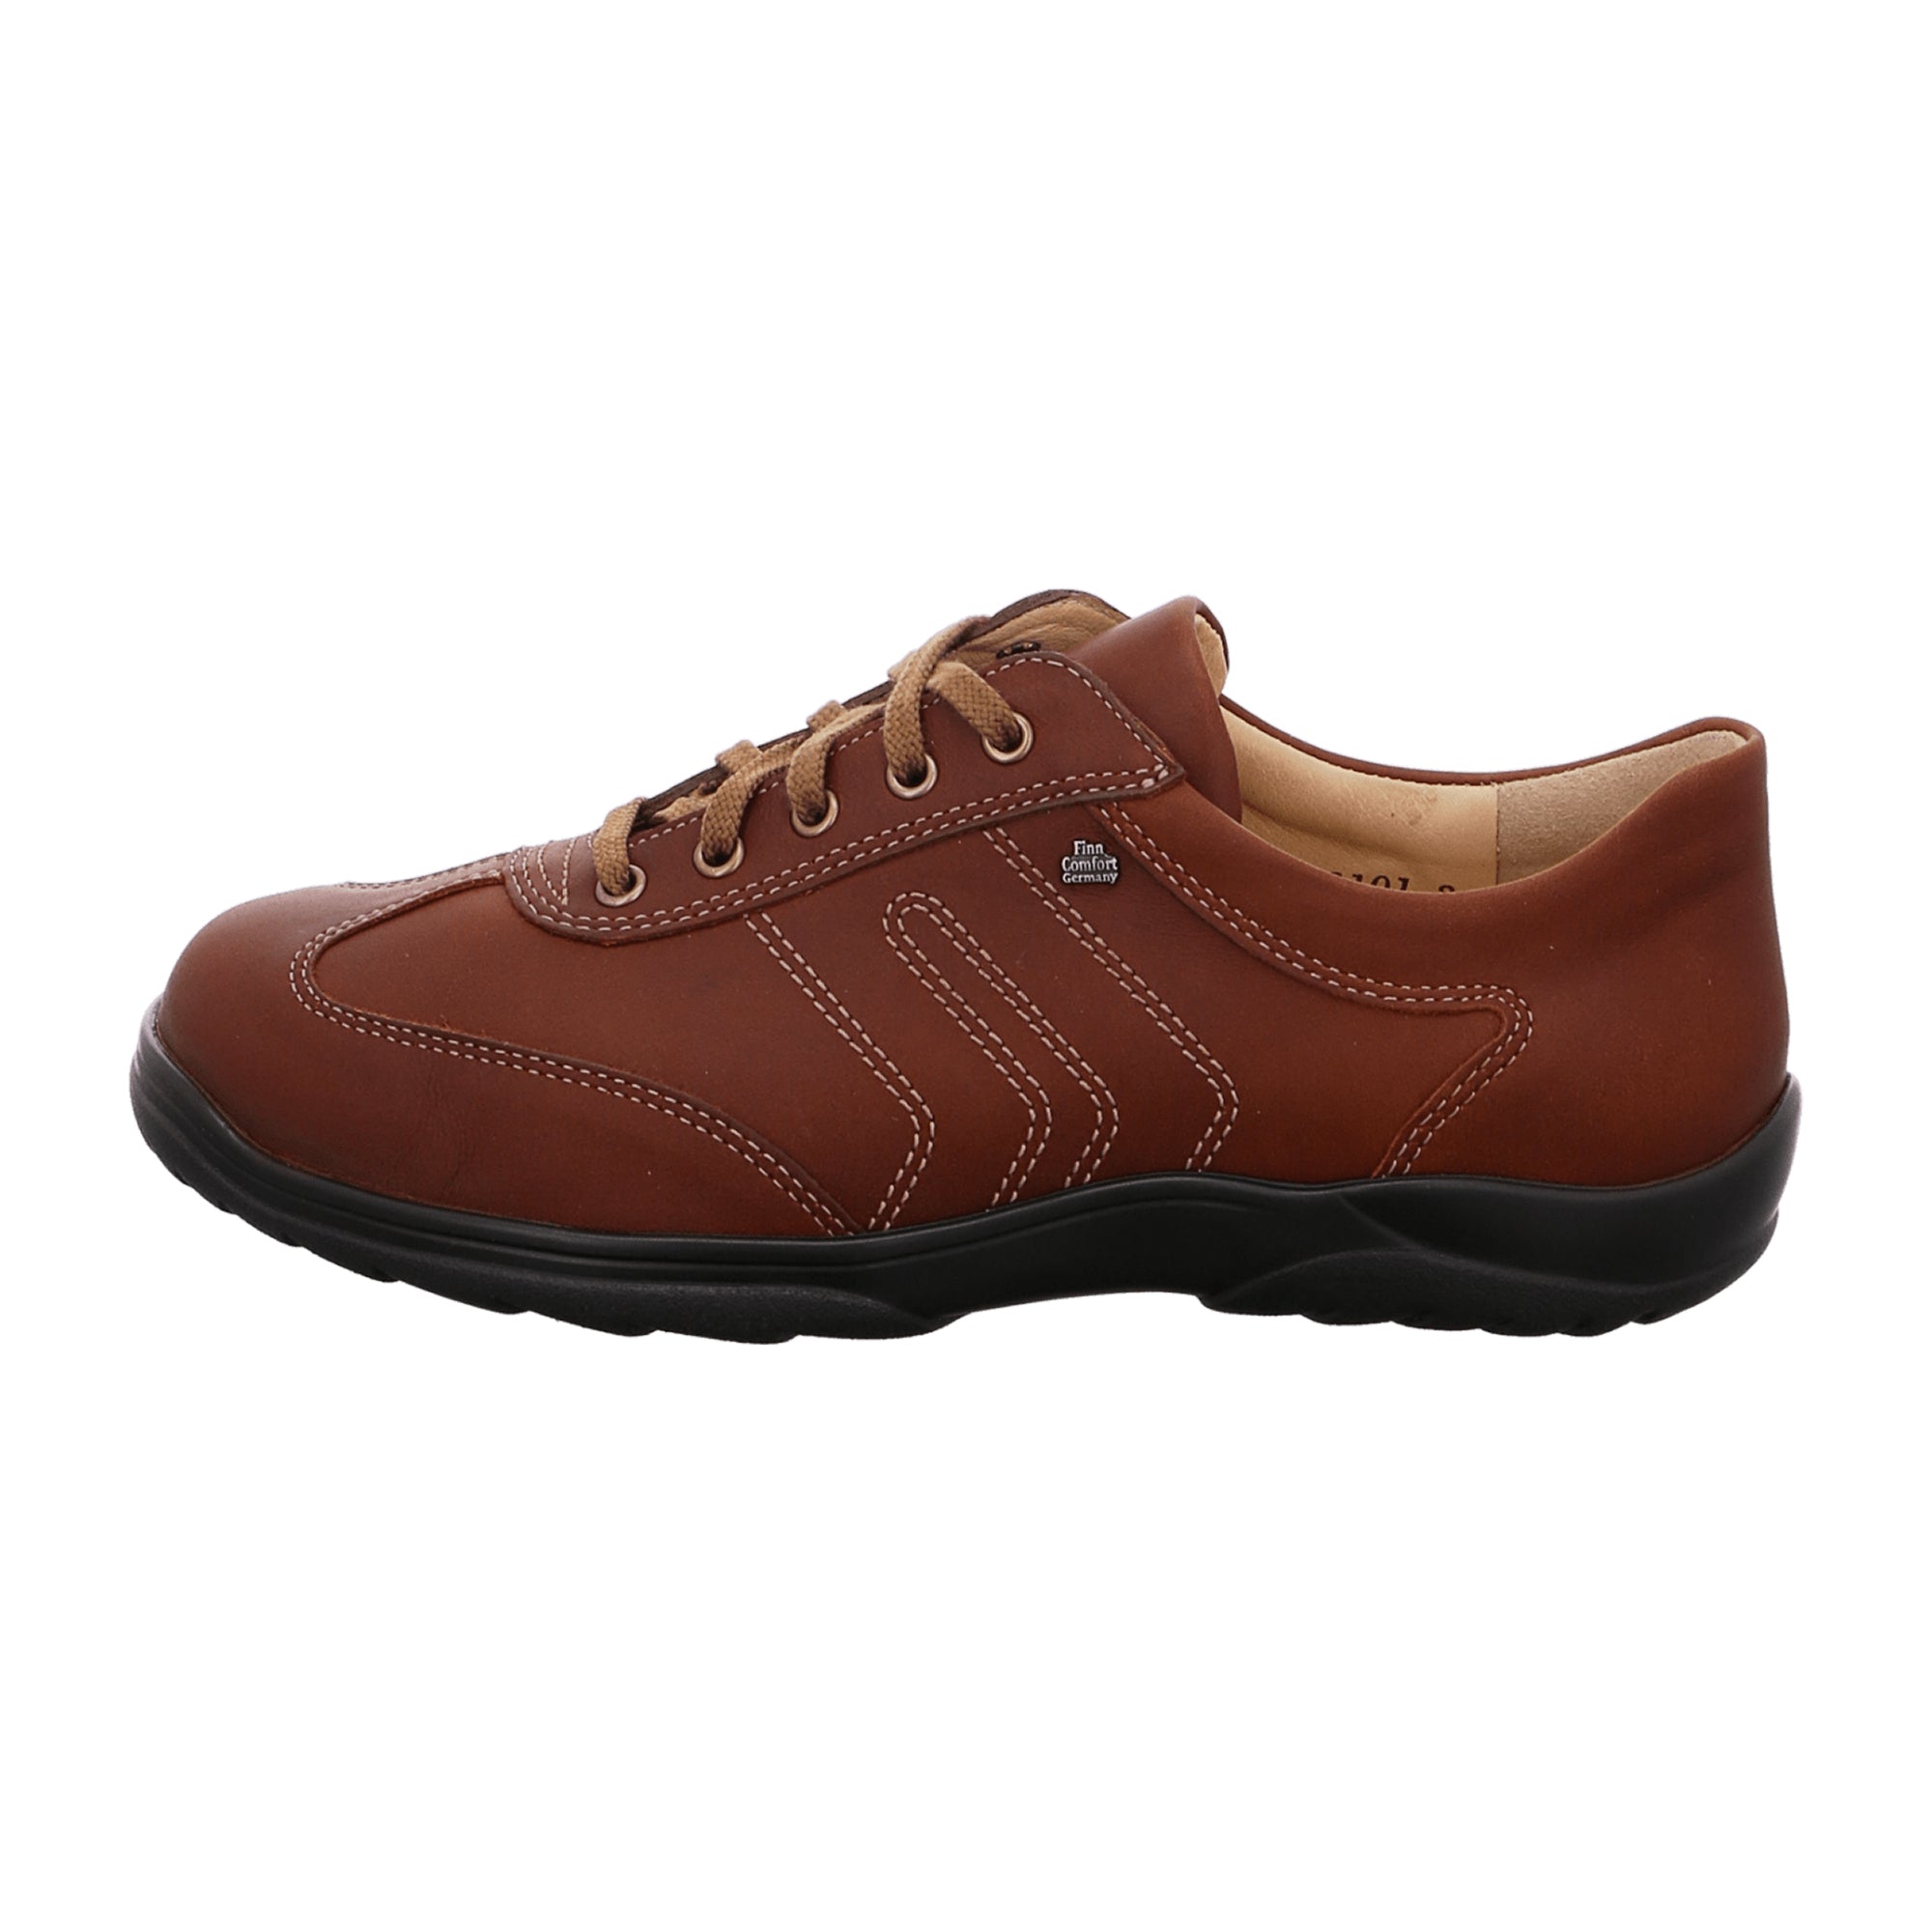 Finn Comfort Syracuse Men's Comfortable Leather Shoes - Stylish Brown